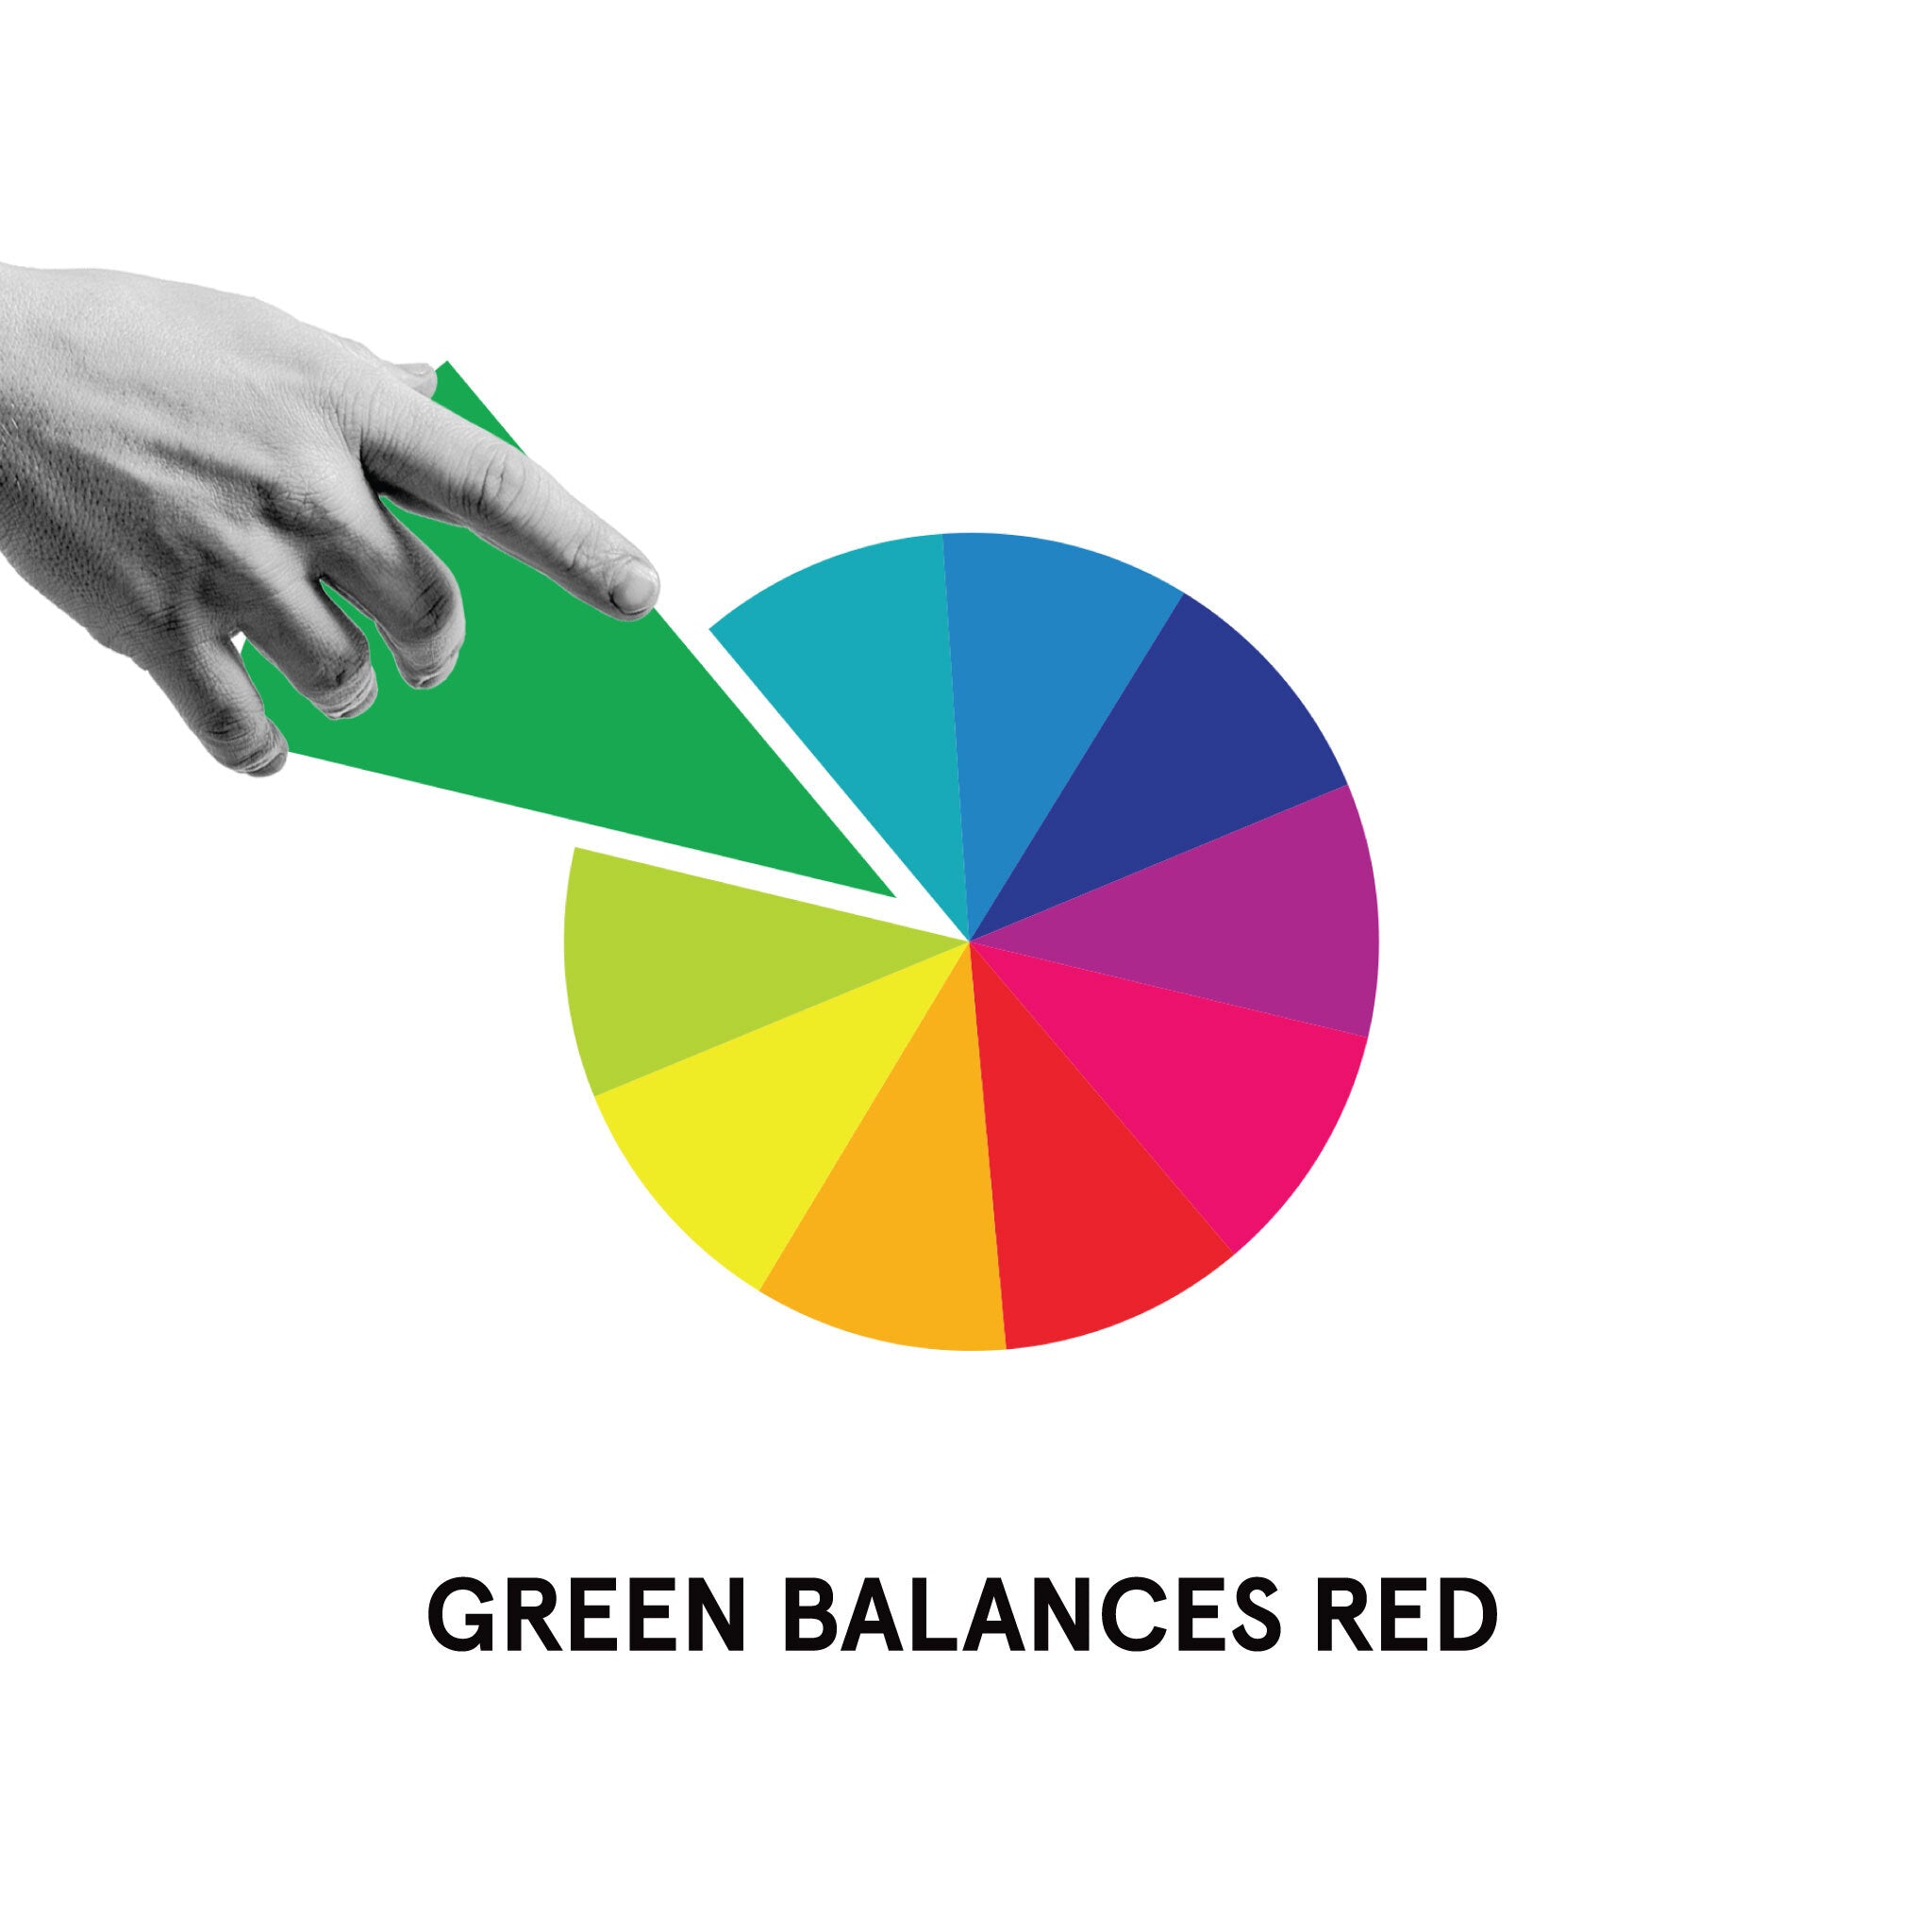 Instant Redness Corrector color wheel saying green balances red